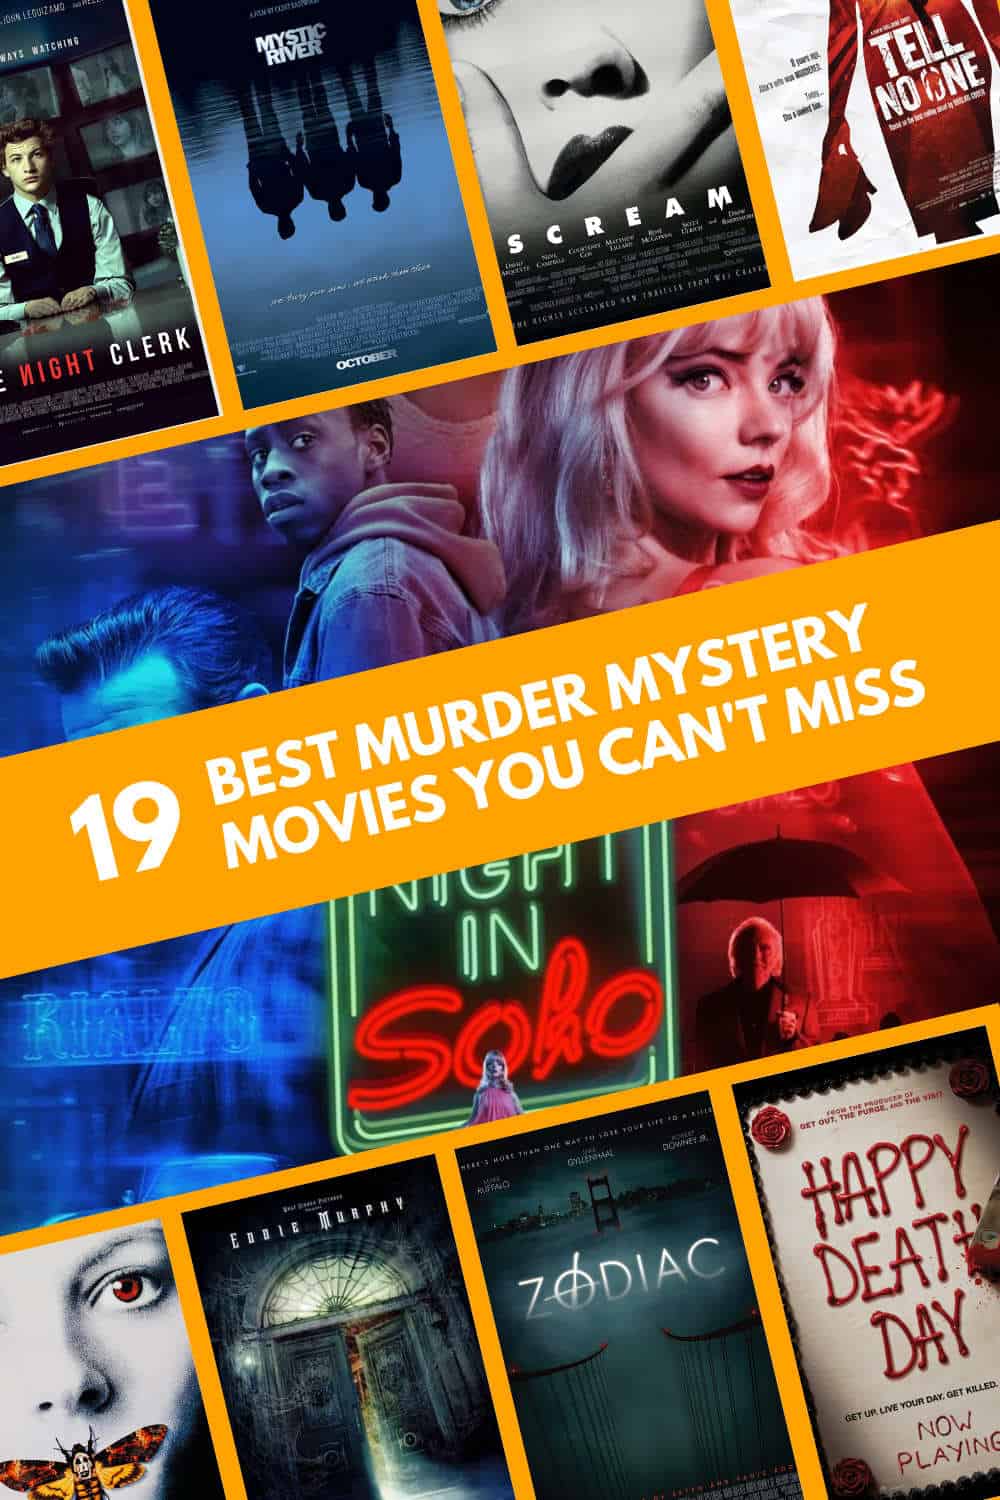 Best Murder Mystery Movies You Can't Miss